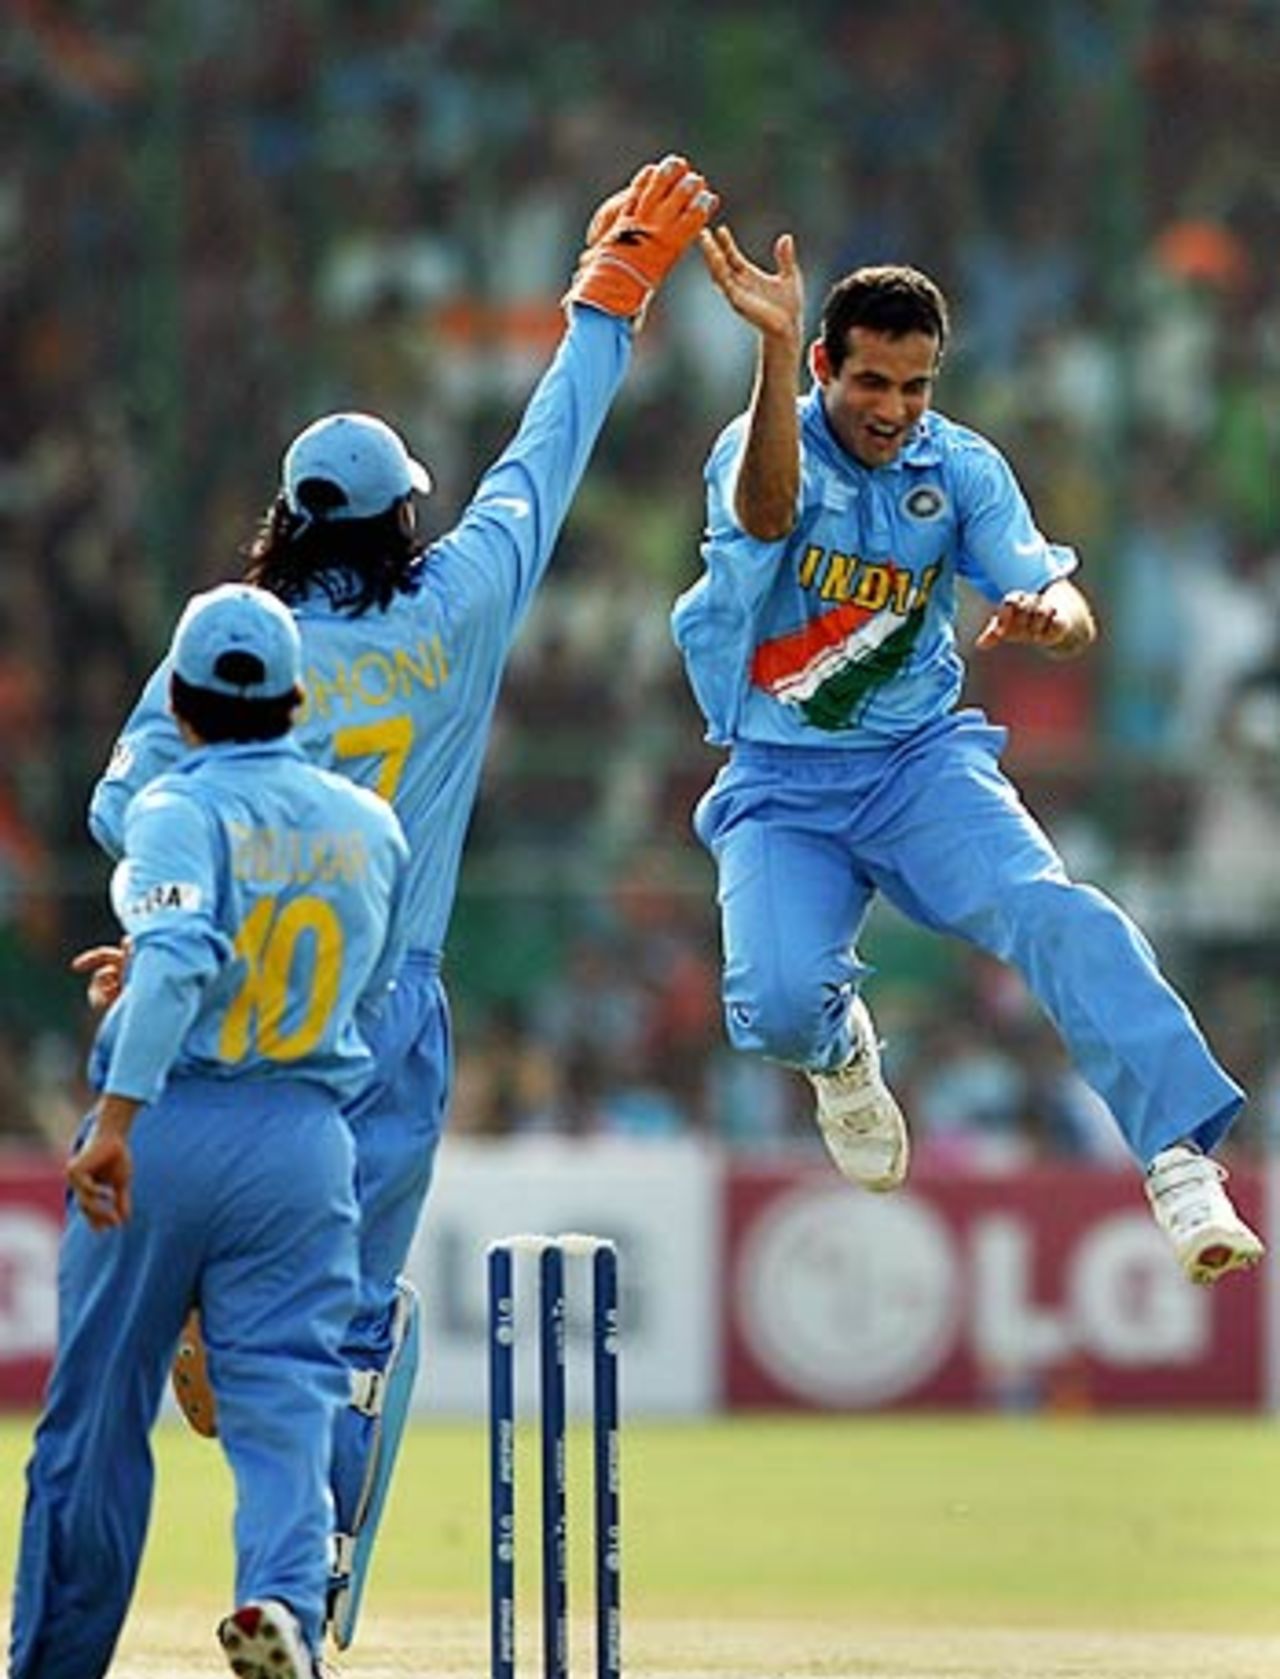 Irfan Pathan celebrates the big wicket of Andrew Flintoff for a duck, India v England, 1st match, Champions Trophy, Sawai Mansingh Stadium, Jaipur, October 15, 2006